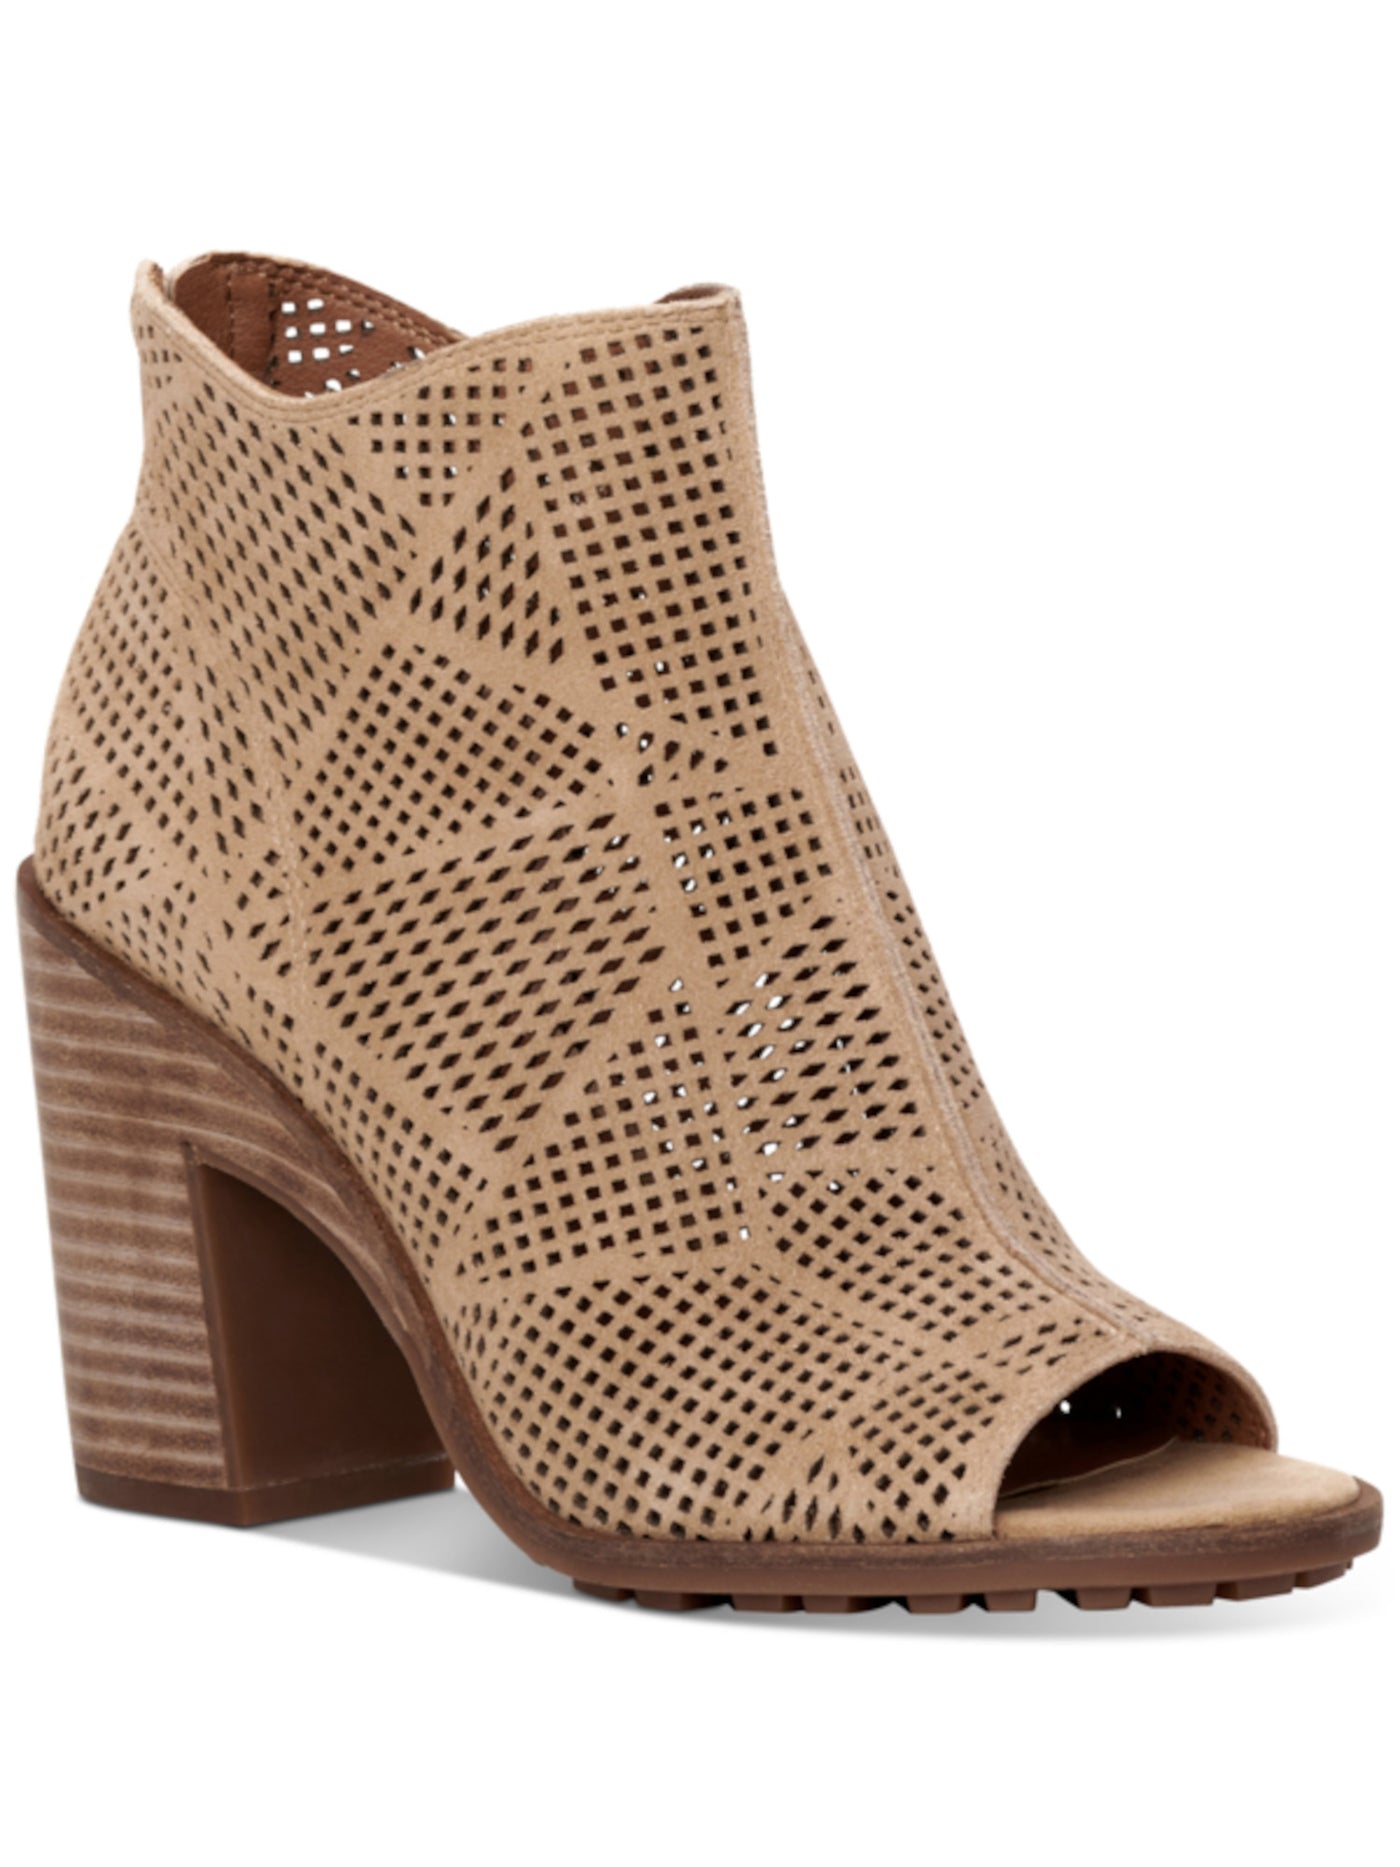 LUCKY BRAND Womens Beige Patterned Padded Perforated Lug Sole Vacob Round Toe Stacked Heel Zip-Up Leather Booties 6.5 M